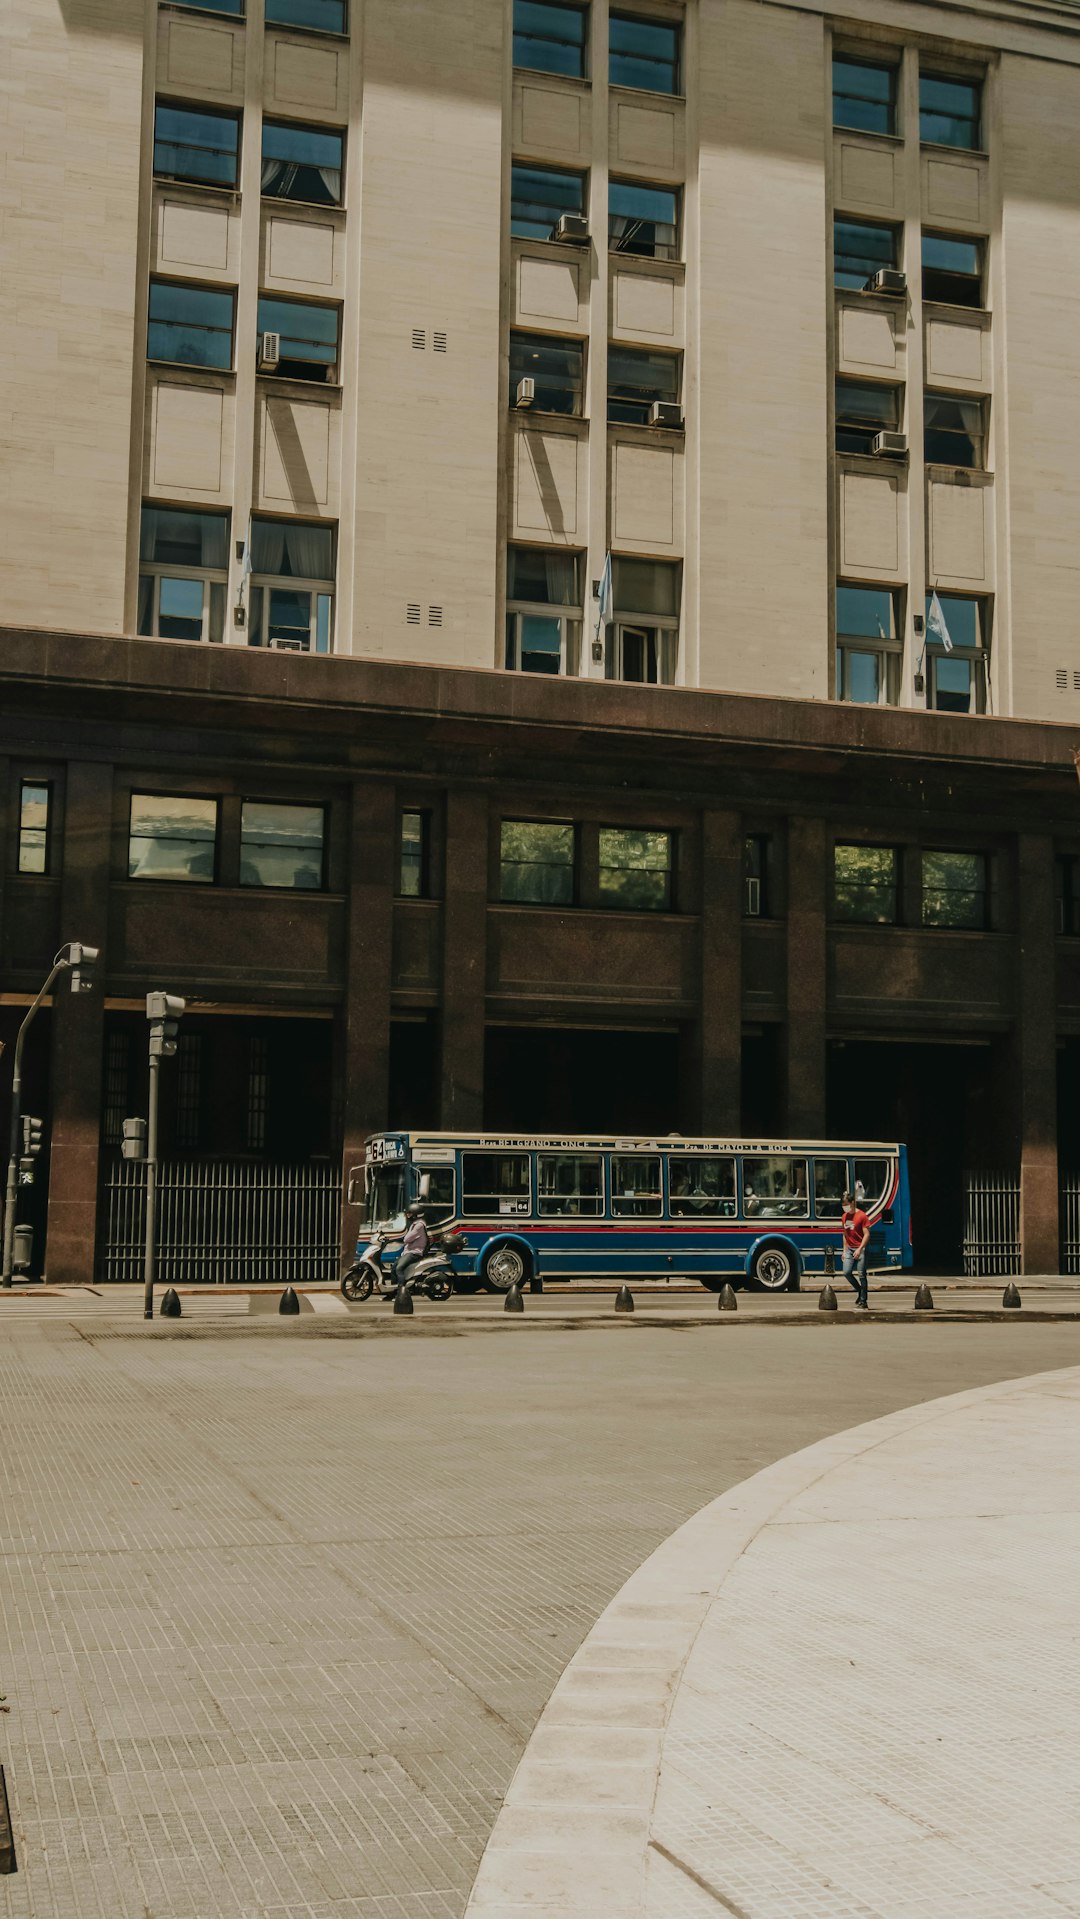 white and blue bus on road near building during daytime